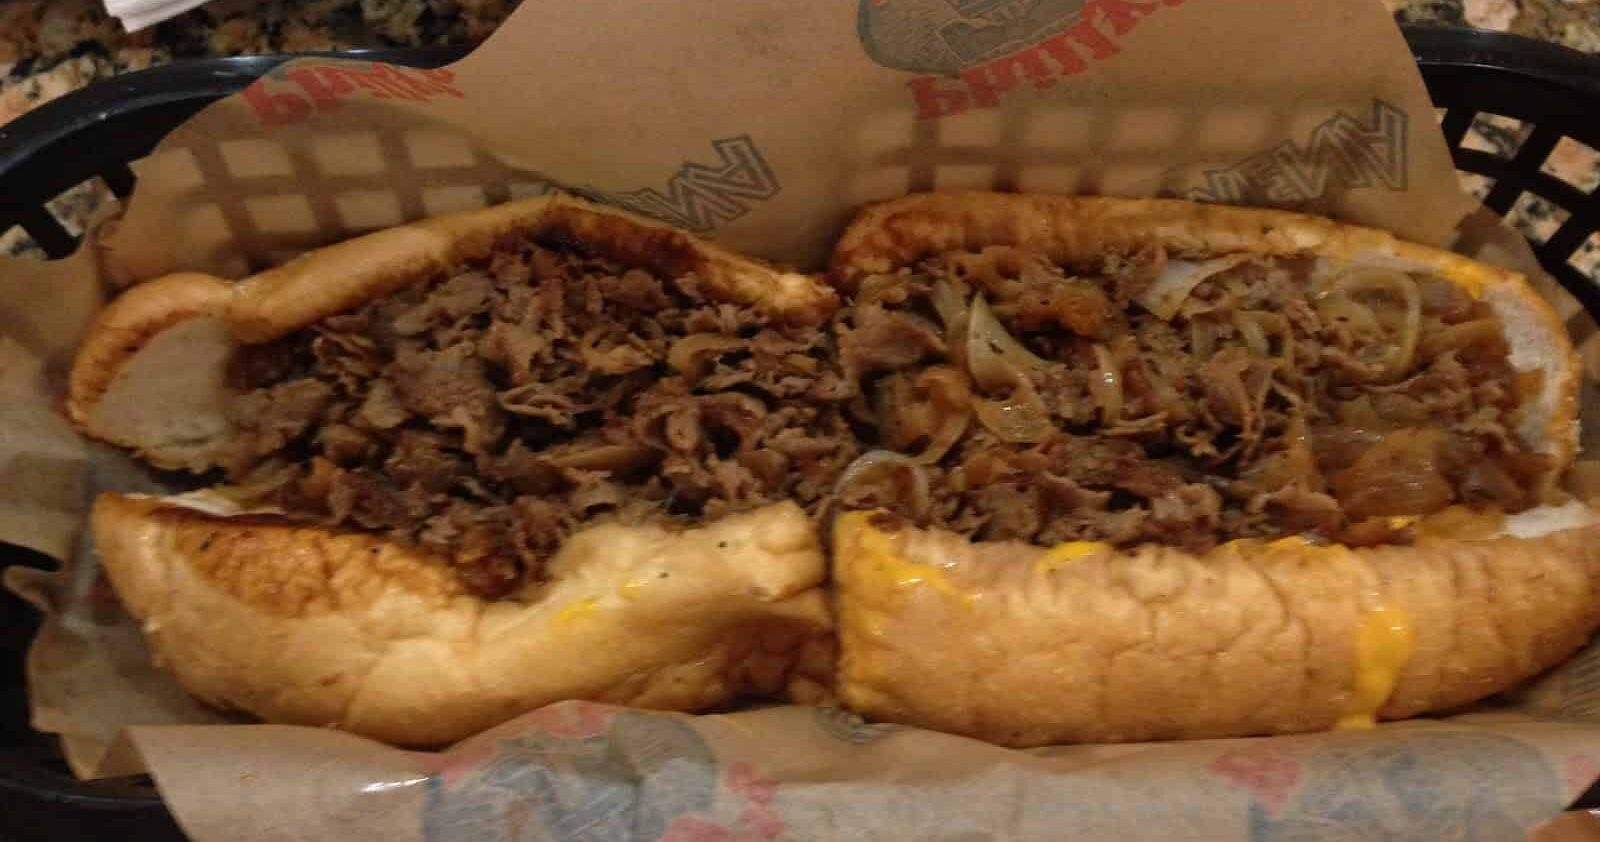 Philly cheesesteak at Philly's Best